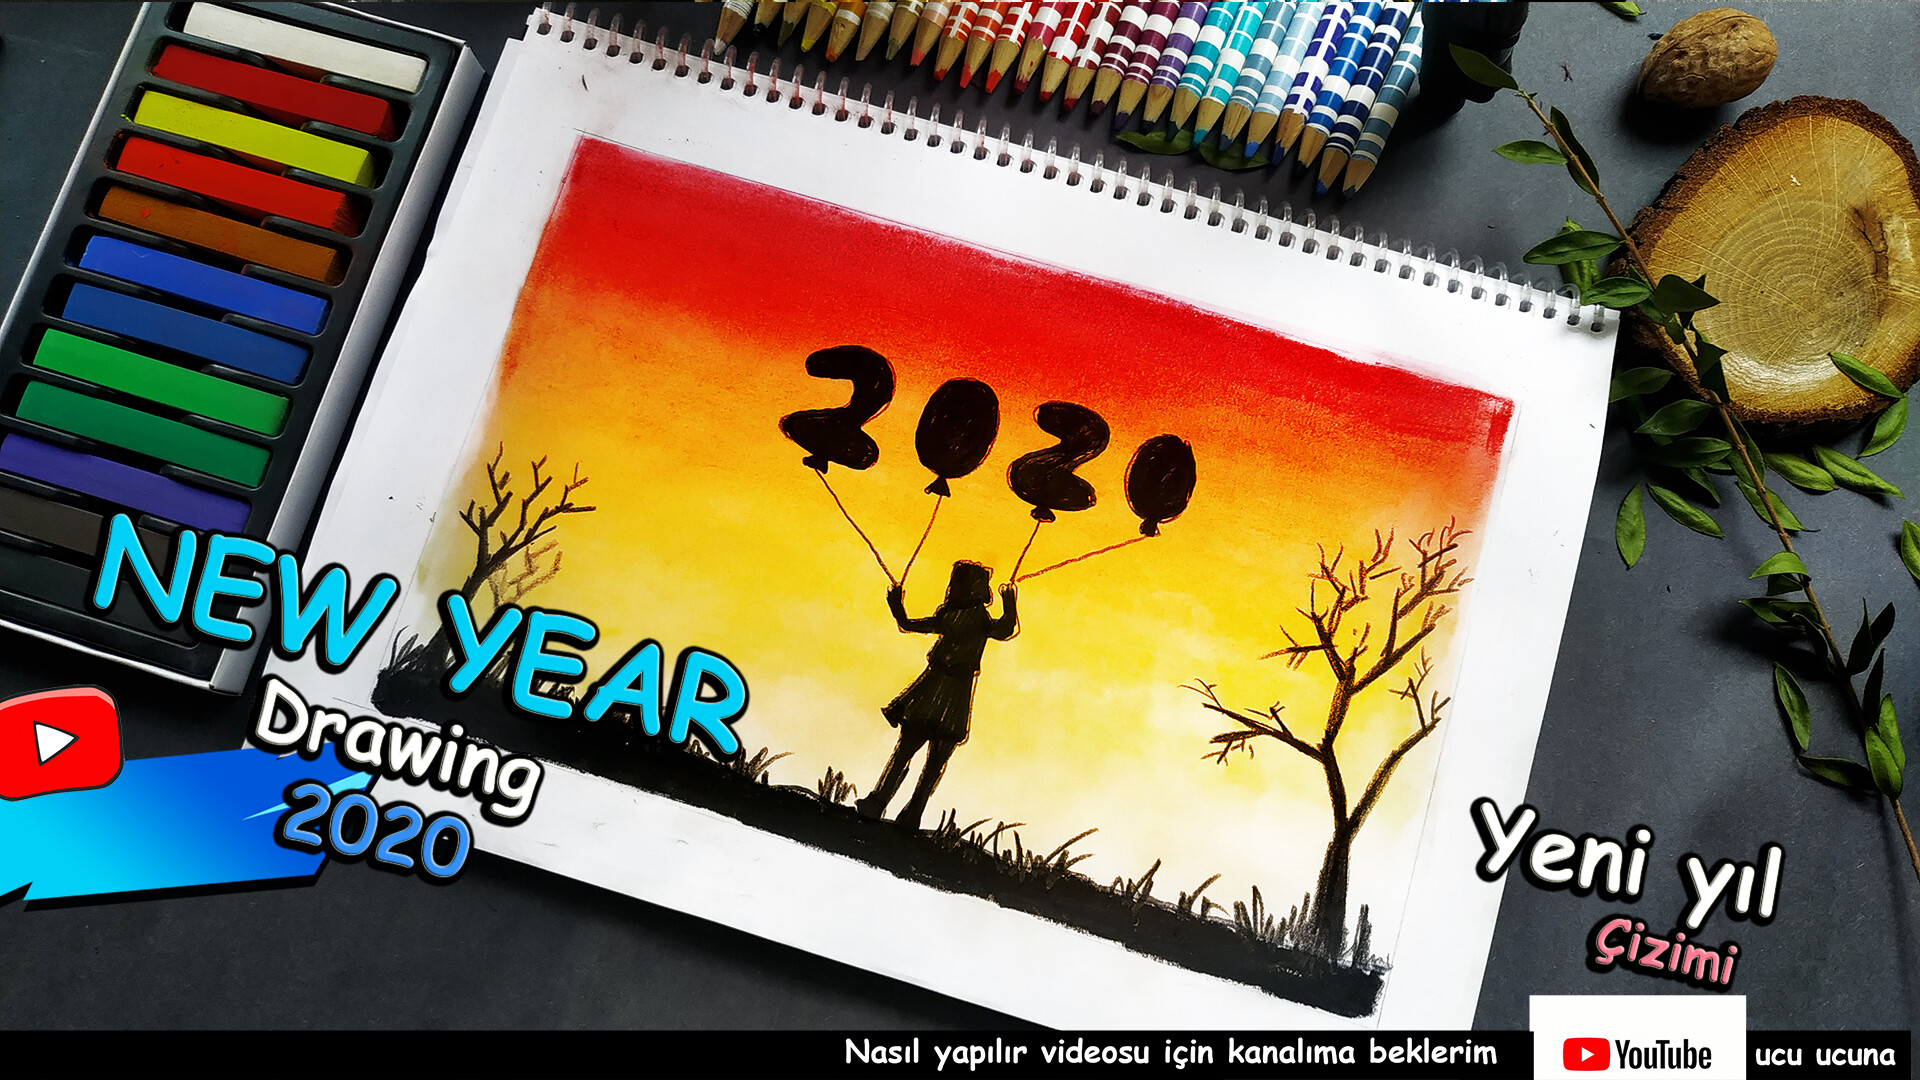 86,451 New Year Sketch Drawing Doodles Images, Stock Photos, 3D objects, &  Vectors | Shutterstock